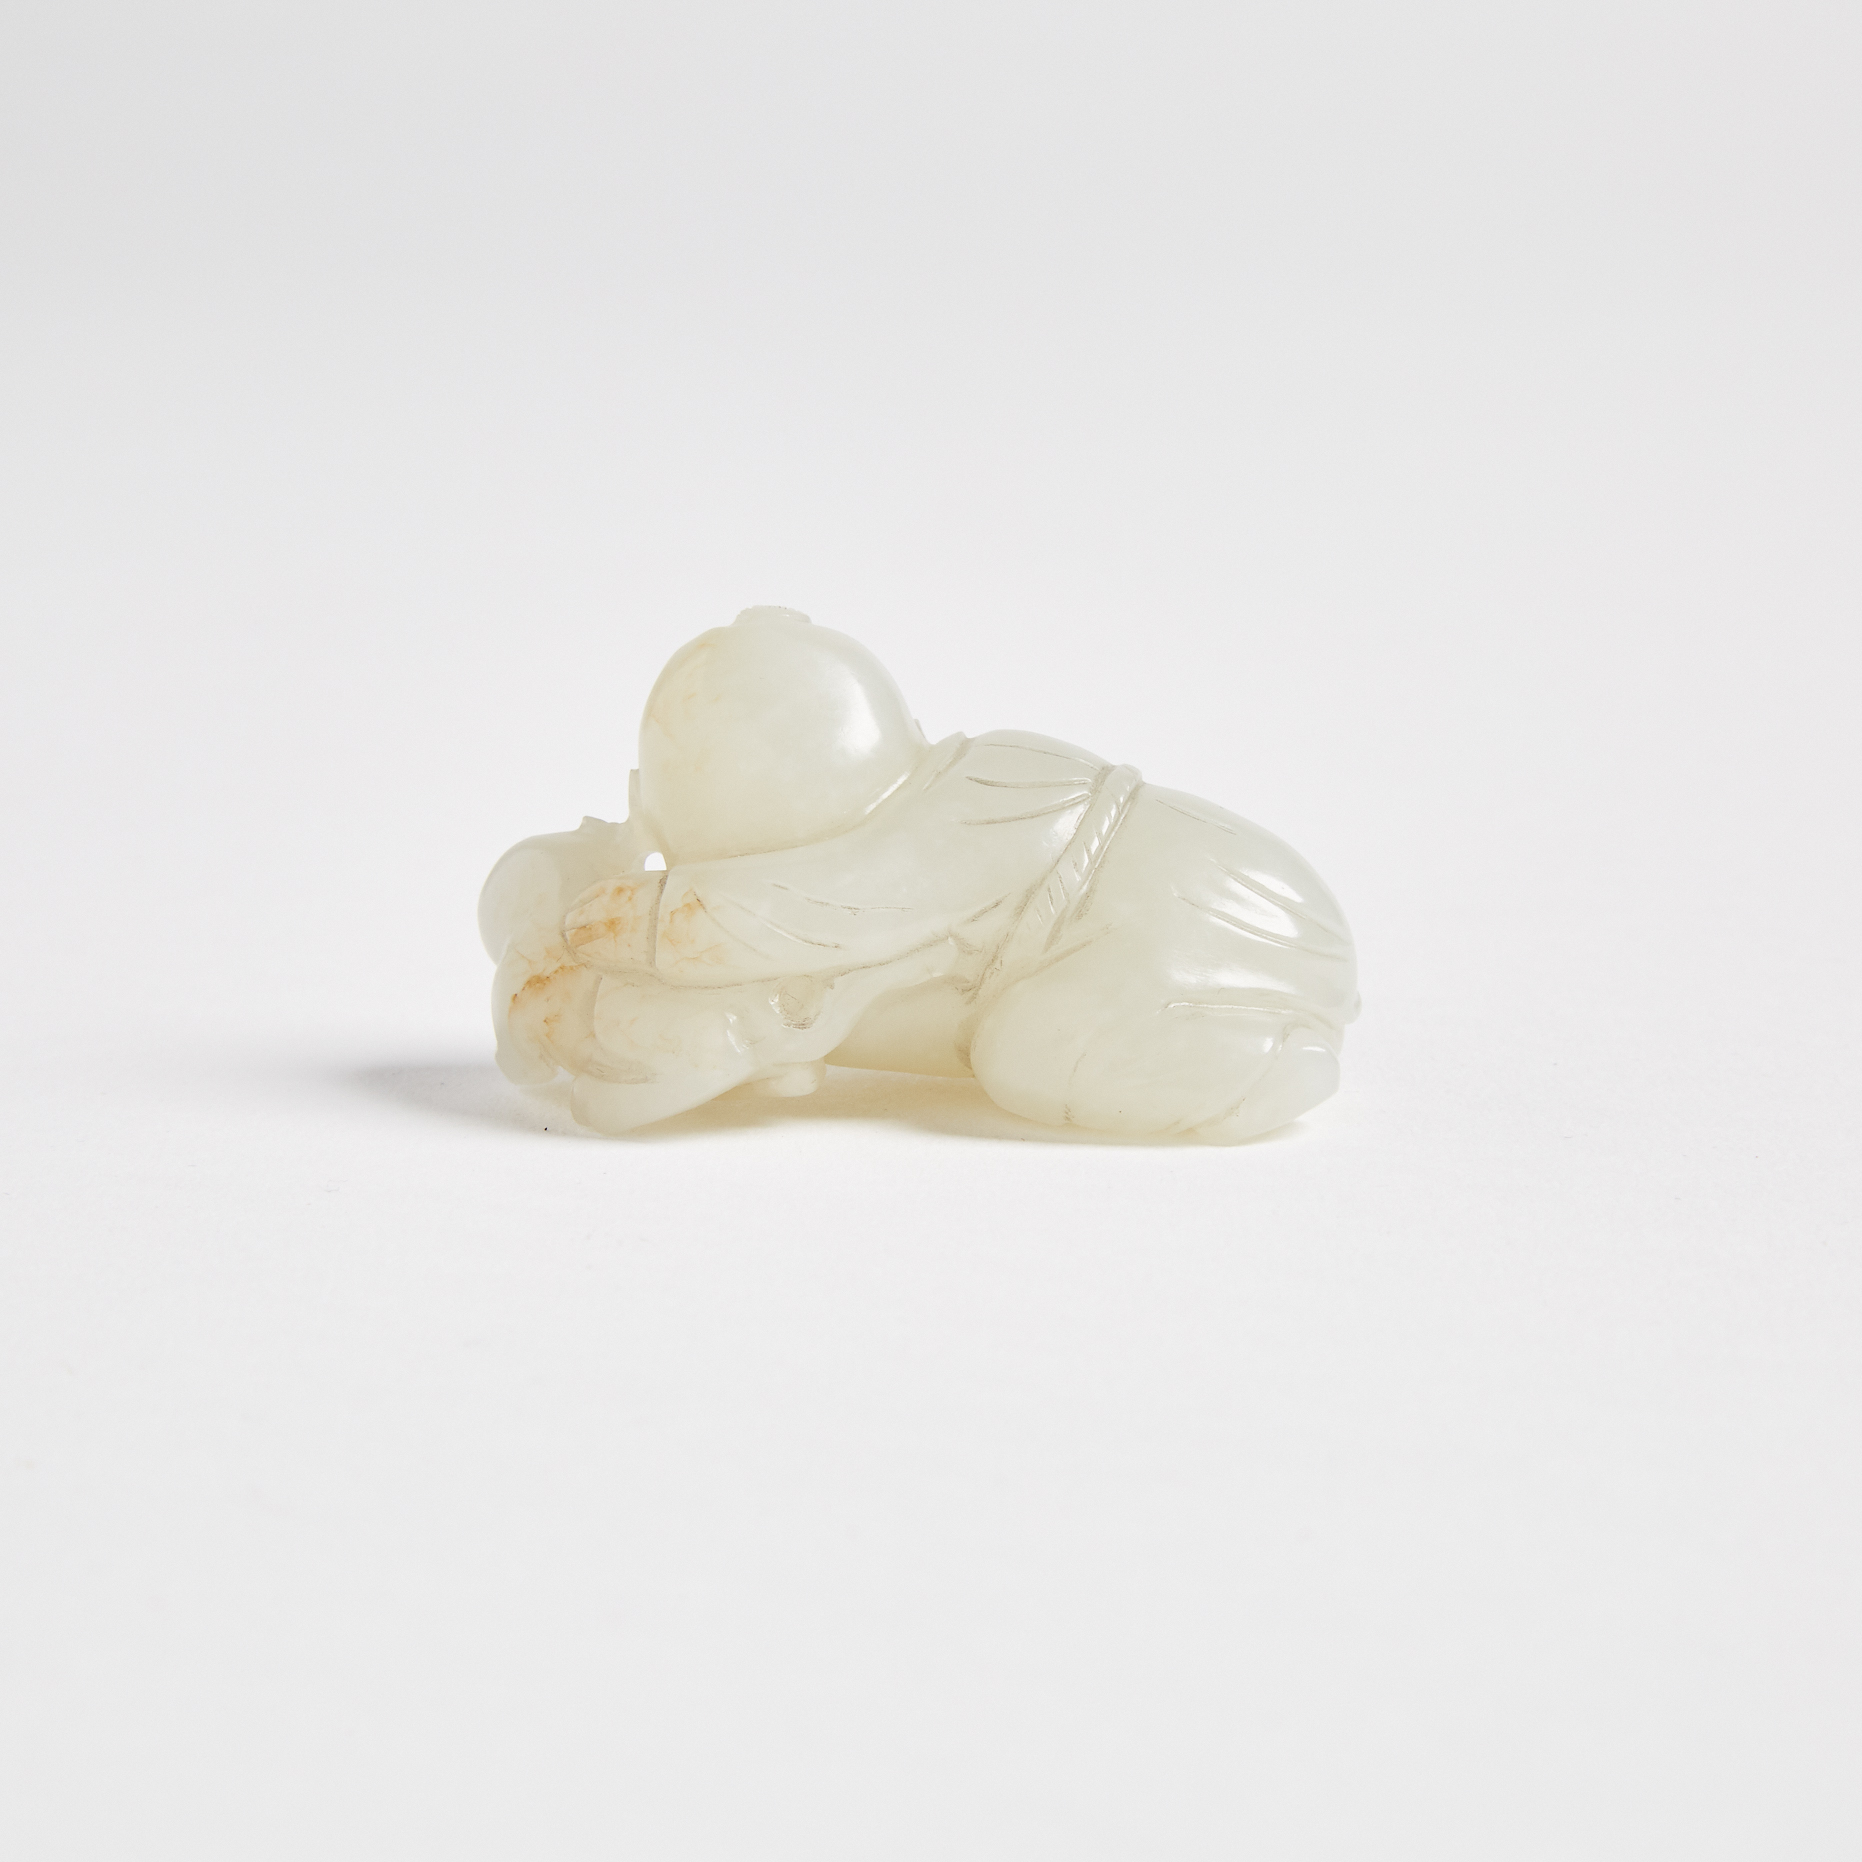 A White Jade Carved Boy with Beast